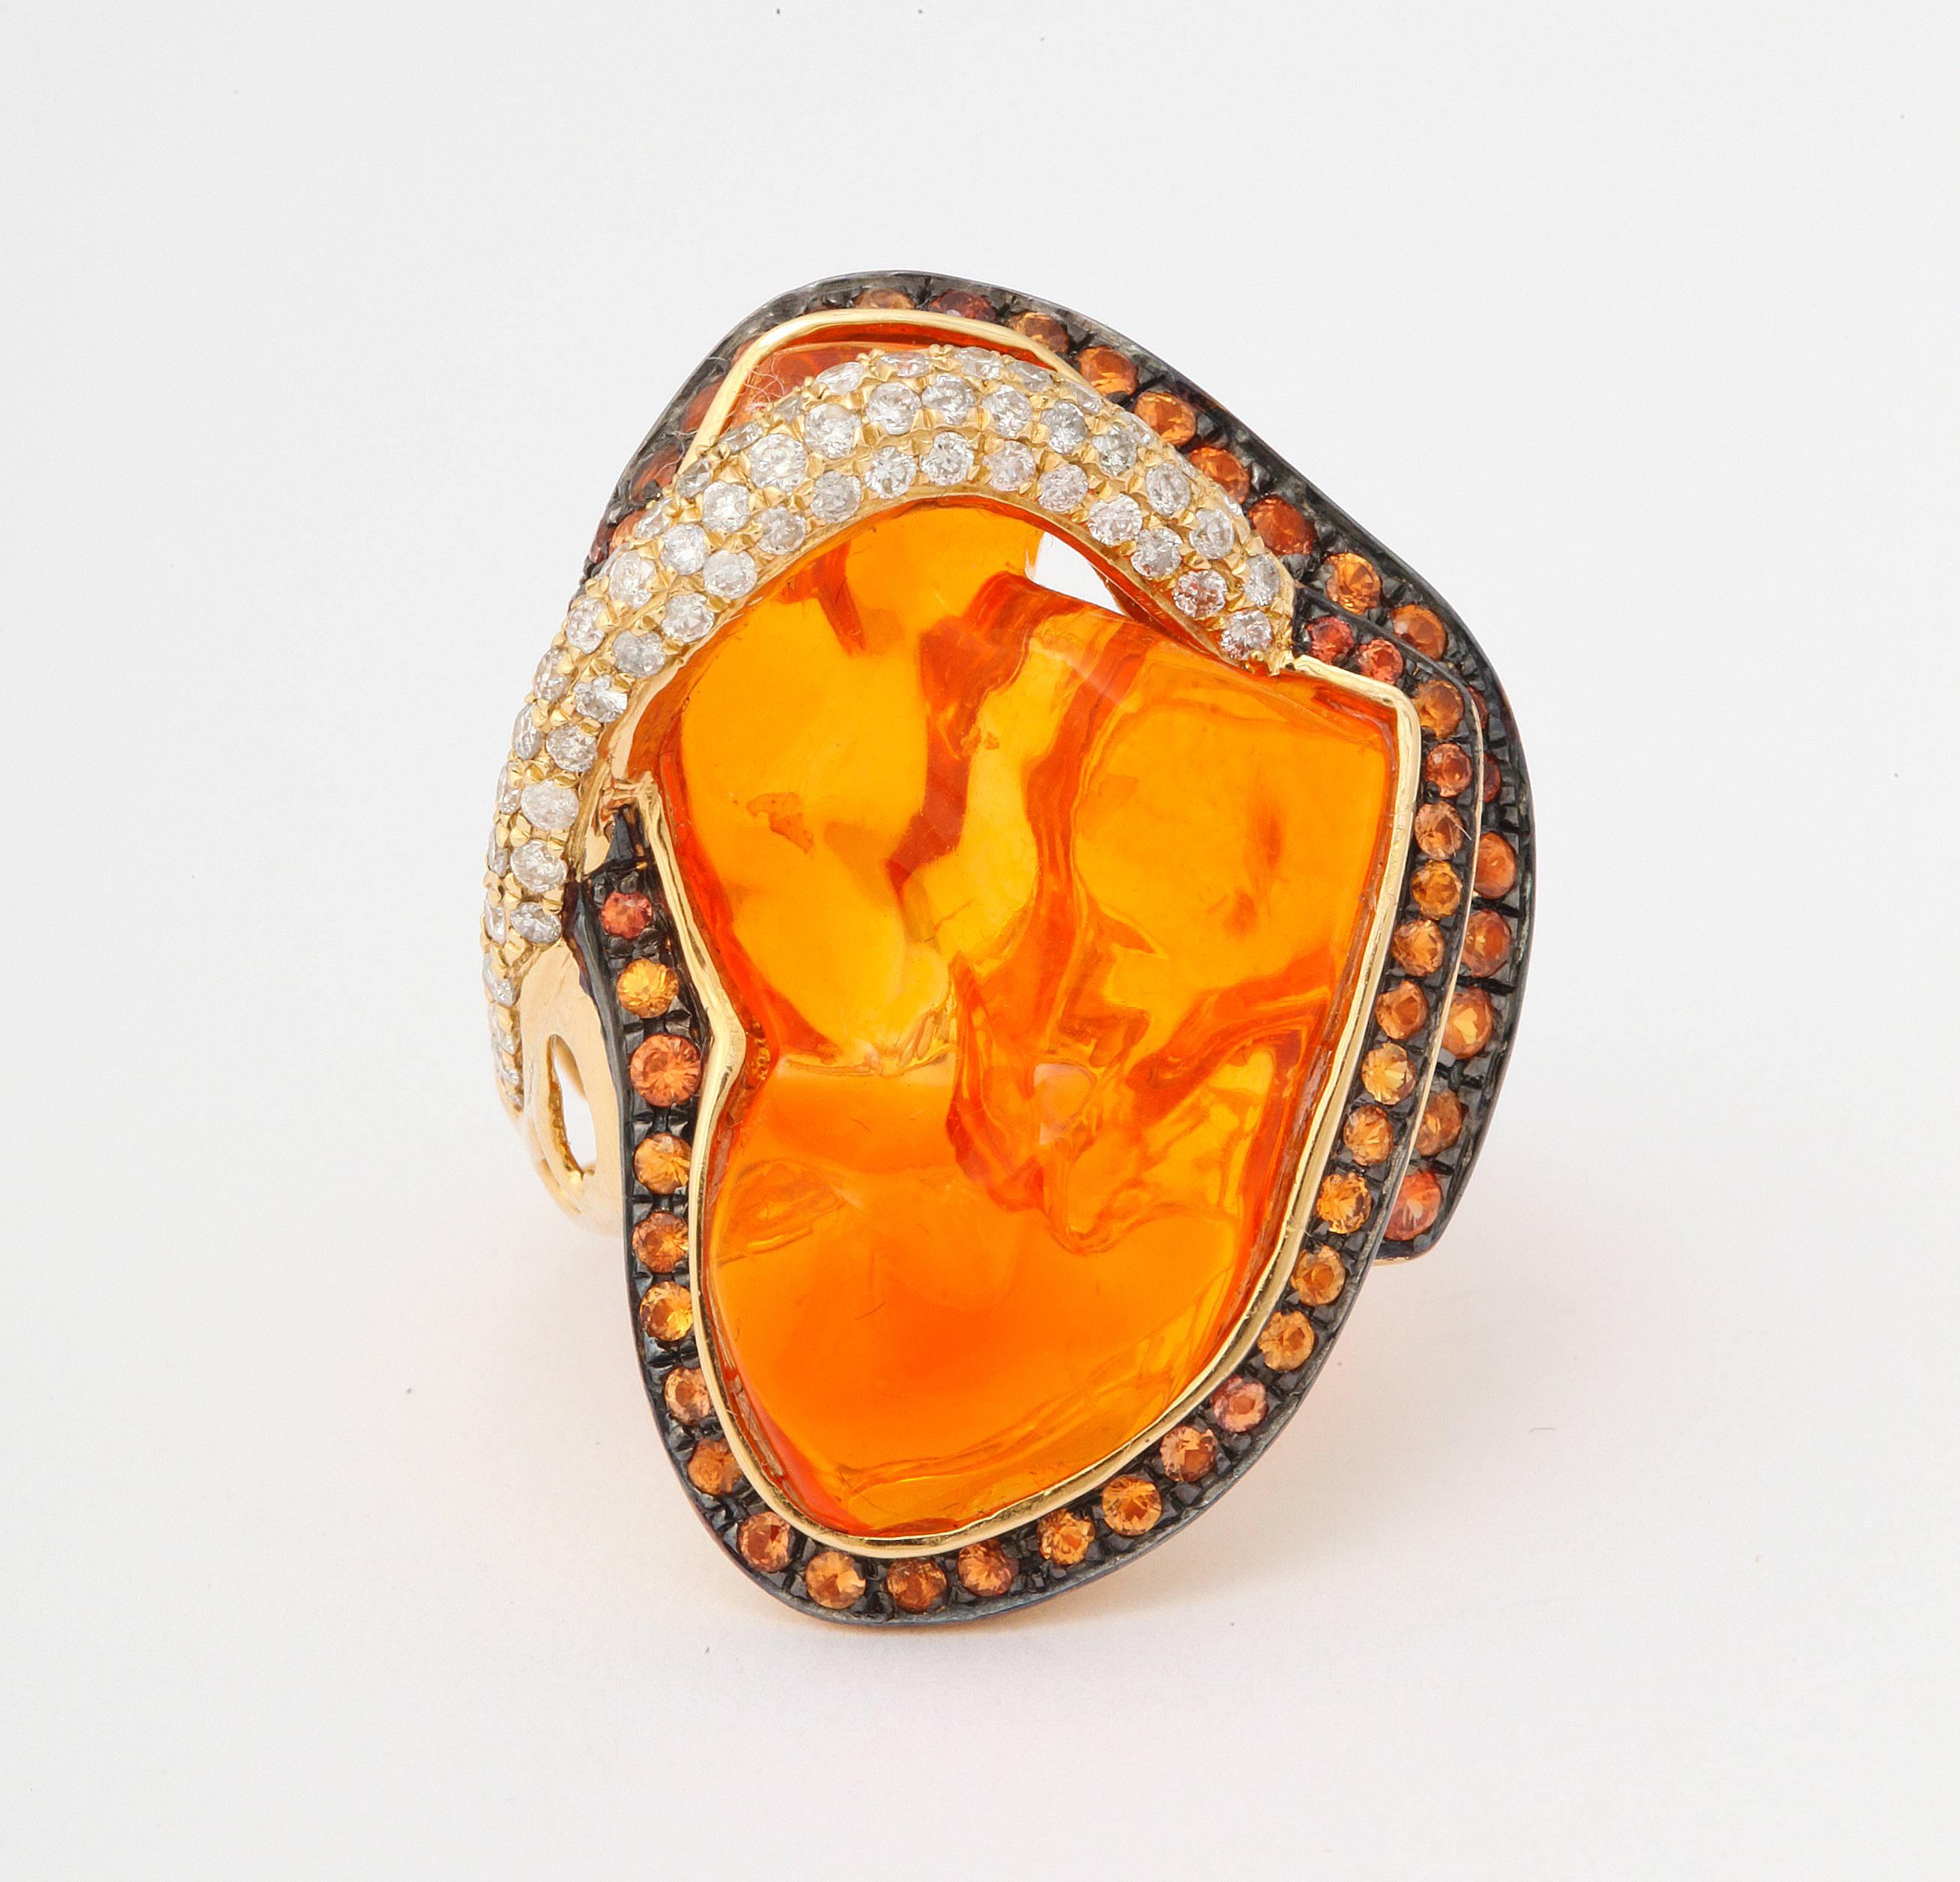 The ring features a centrally set fee form, bright orange Mexican opal.  Set in blackened gold are equally bright orange sapphires, while the white diamonds are set into yellow gold.  Bold, unique and original, this piece is one of a kind.

For